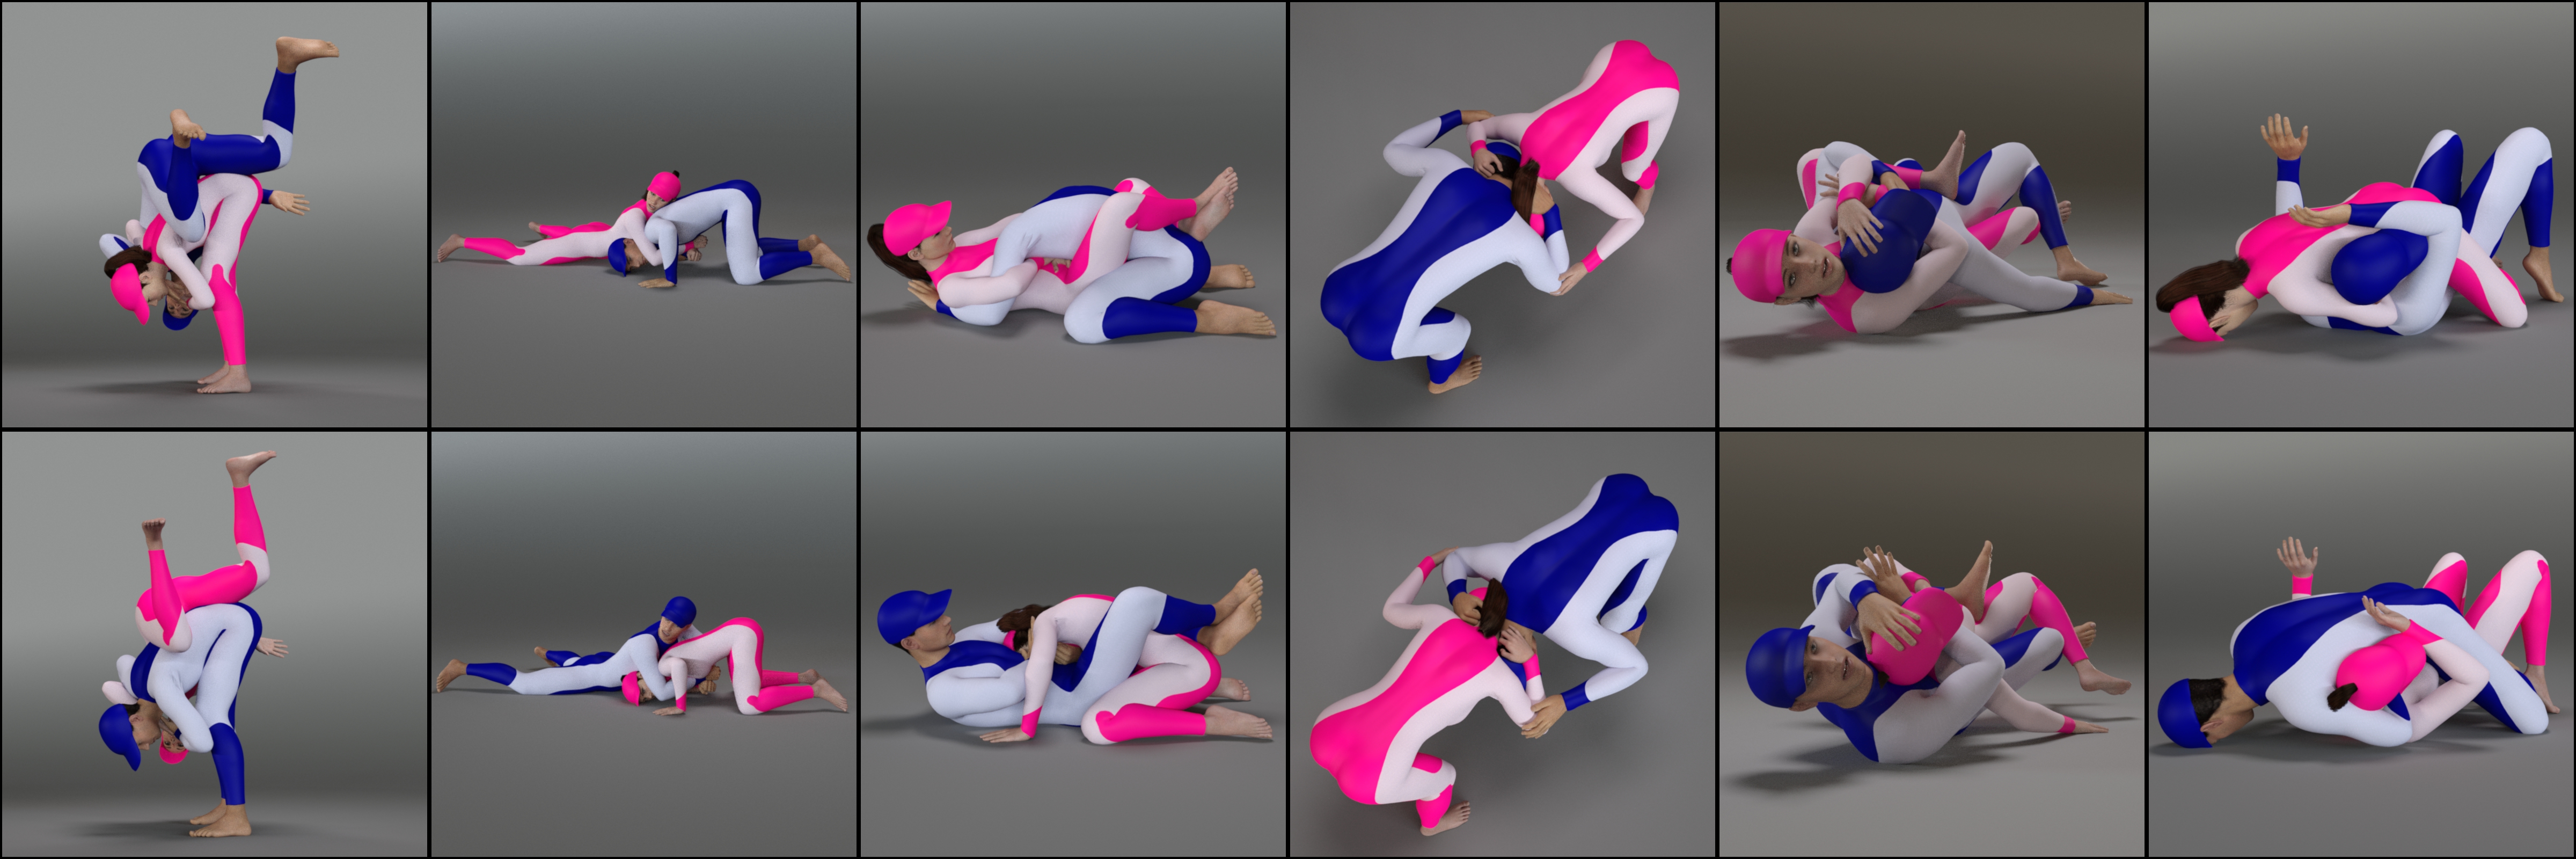 Grappling Poses Volume 1 for Genesis 8 and 8.1 Male and Female by: atrilliongames, 3D Models by Daz 3D